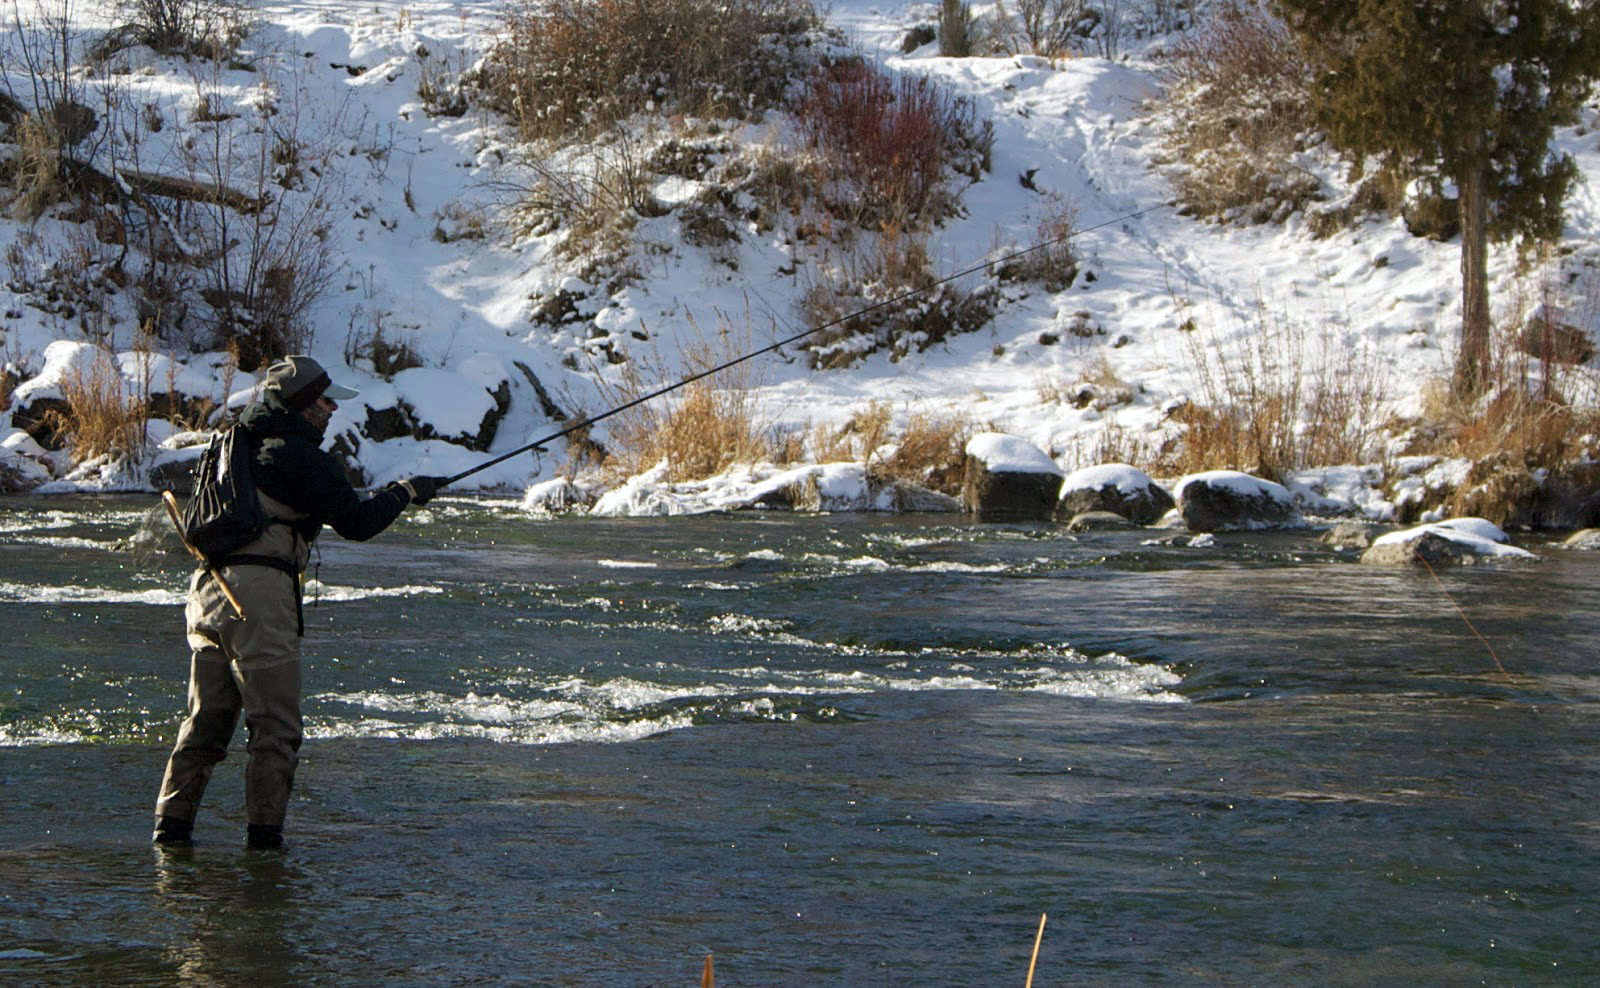 Winter Fishing Clothing and Gear That Works